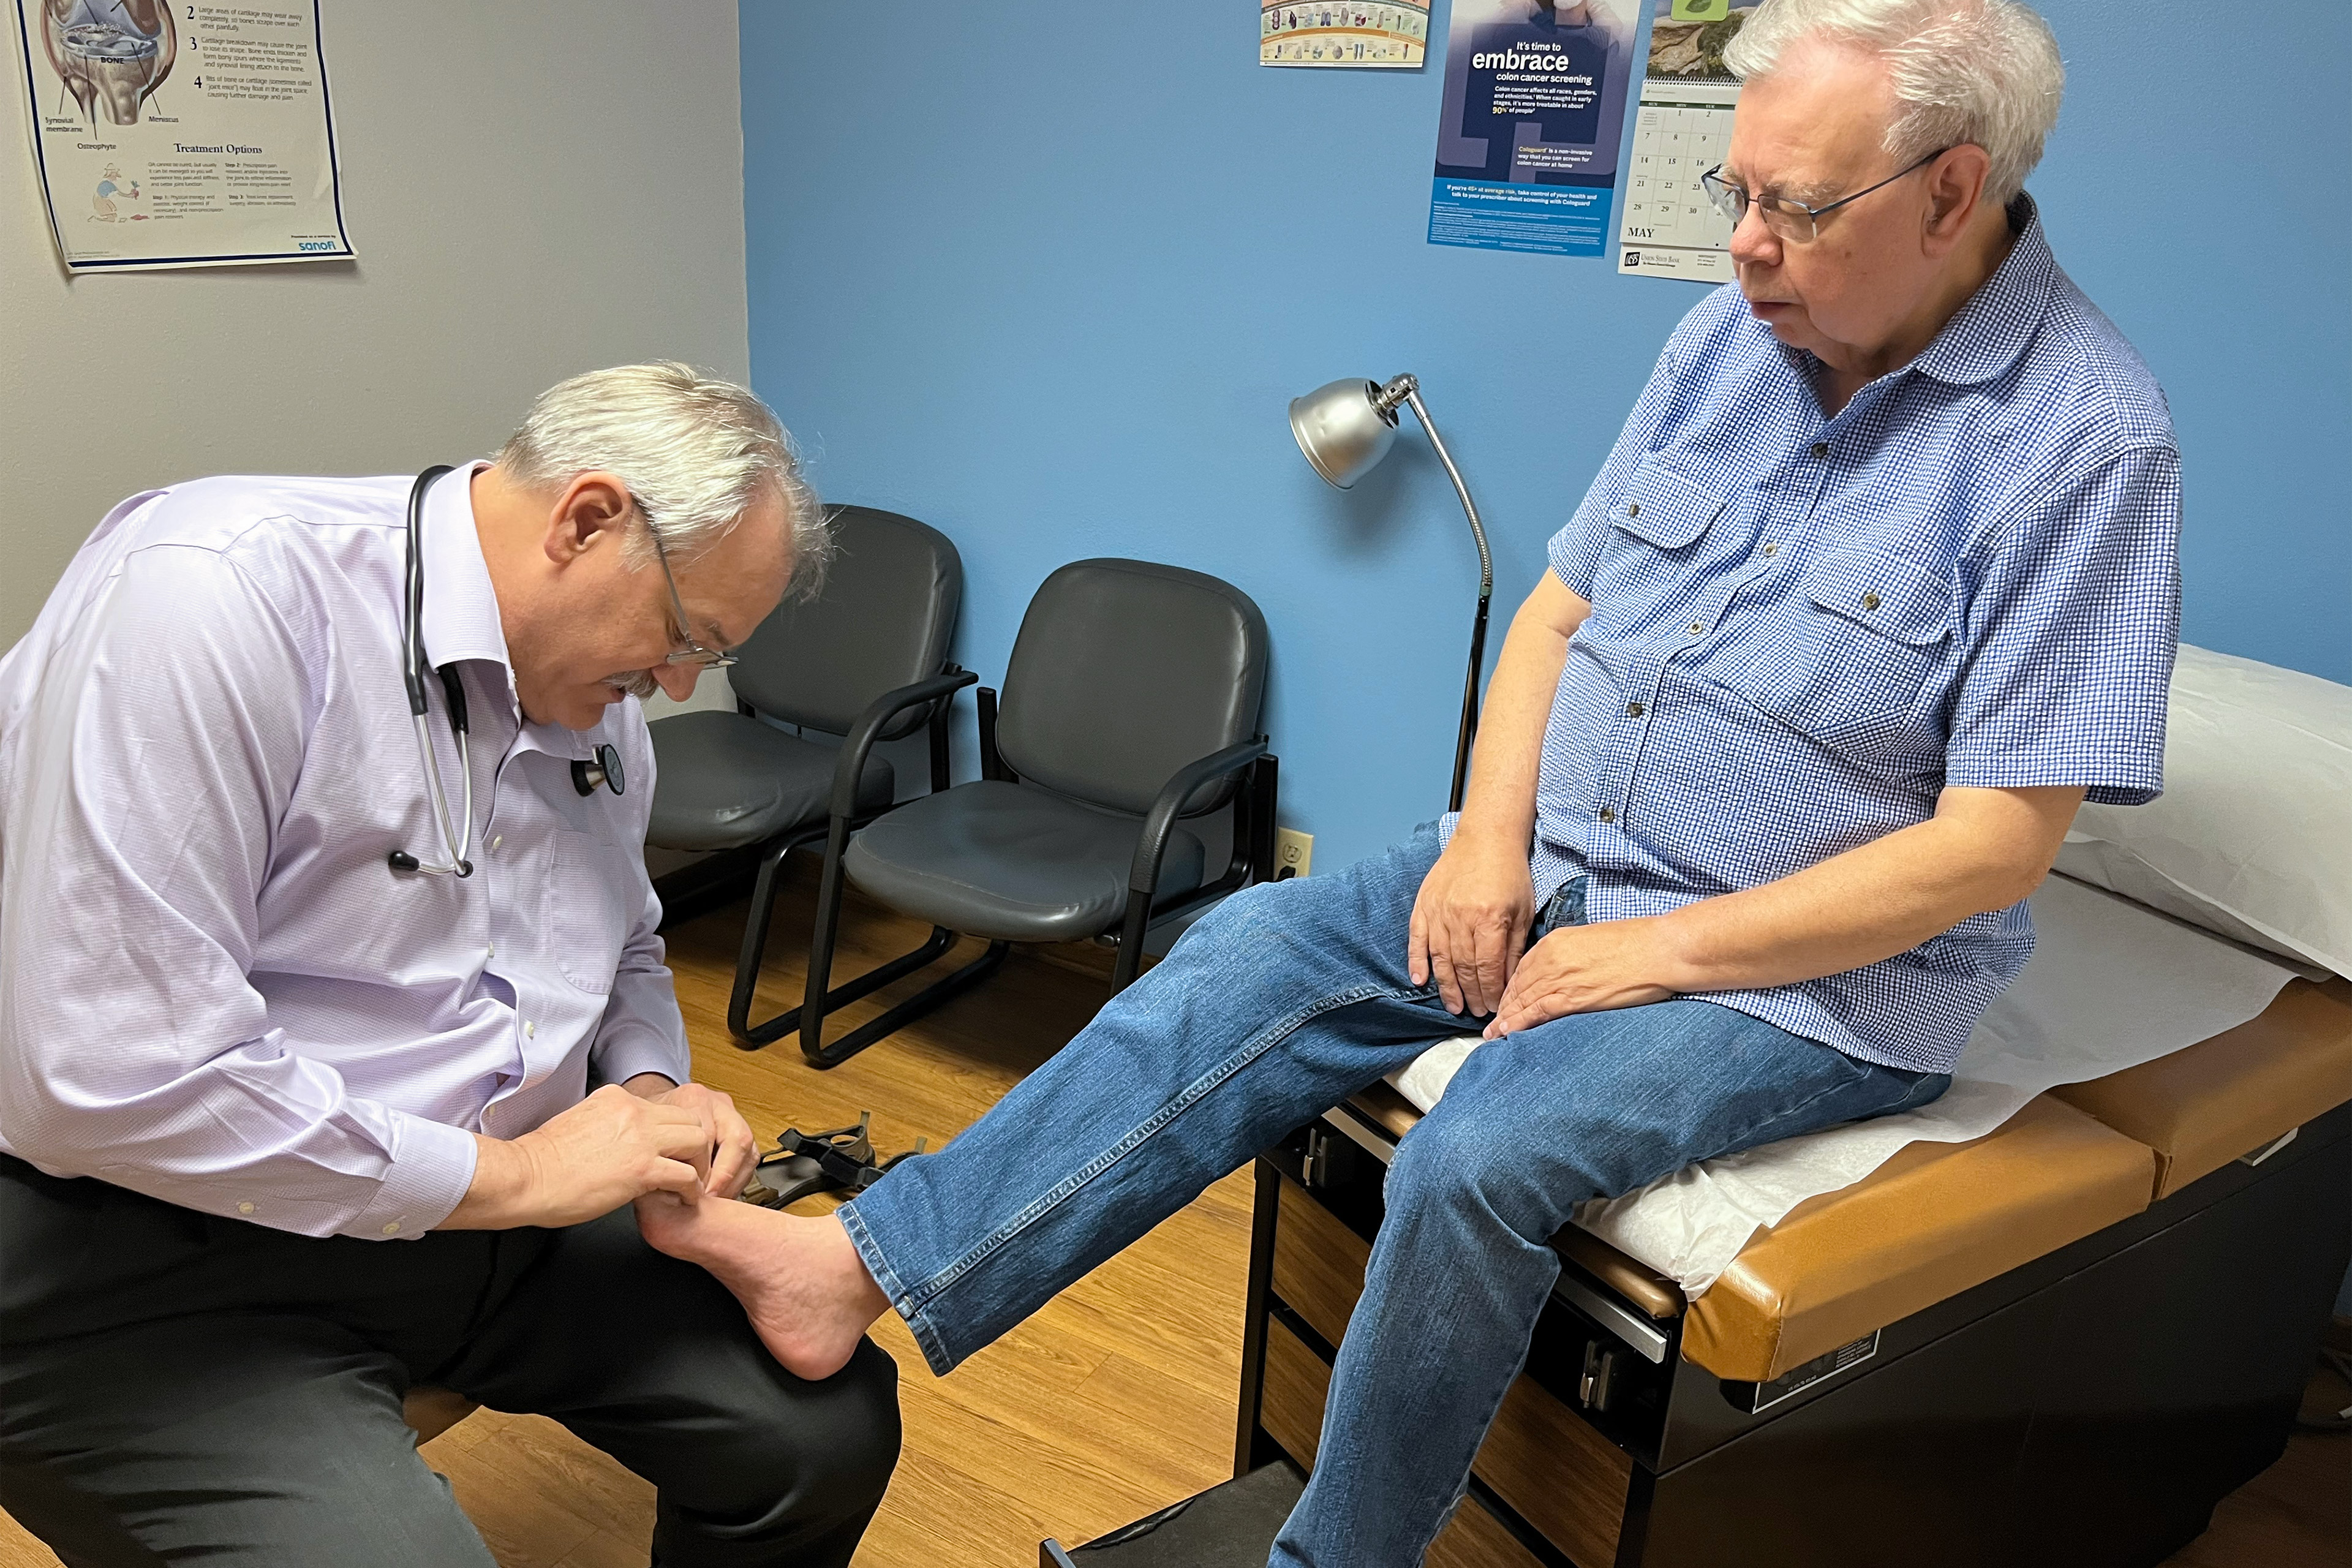 A photo of a doctor examining a male patient's foot.